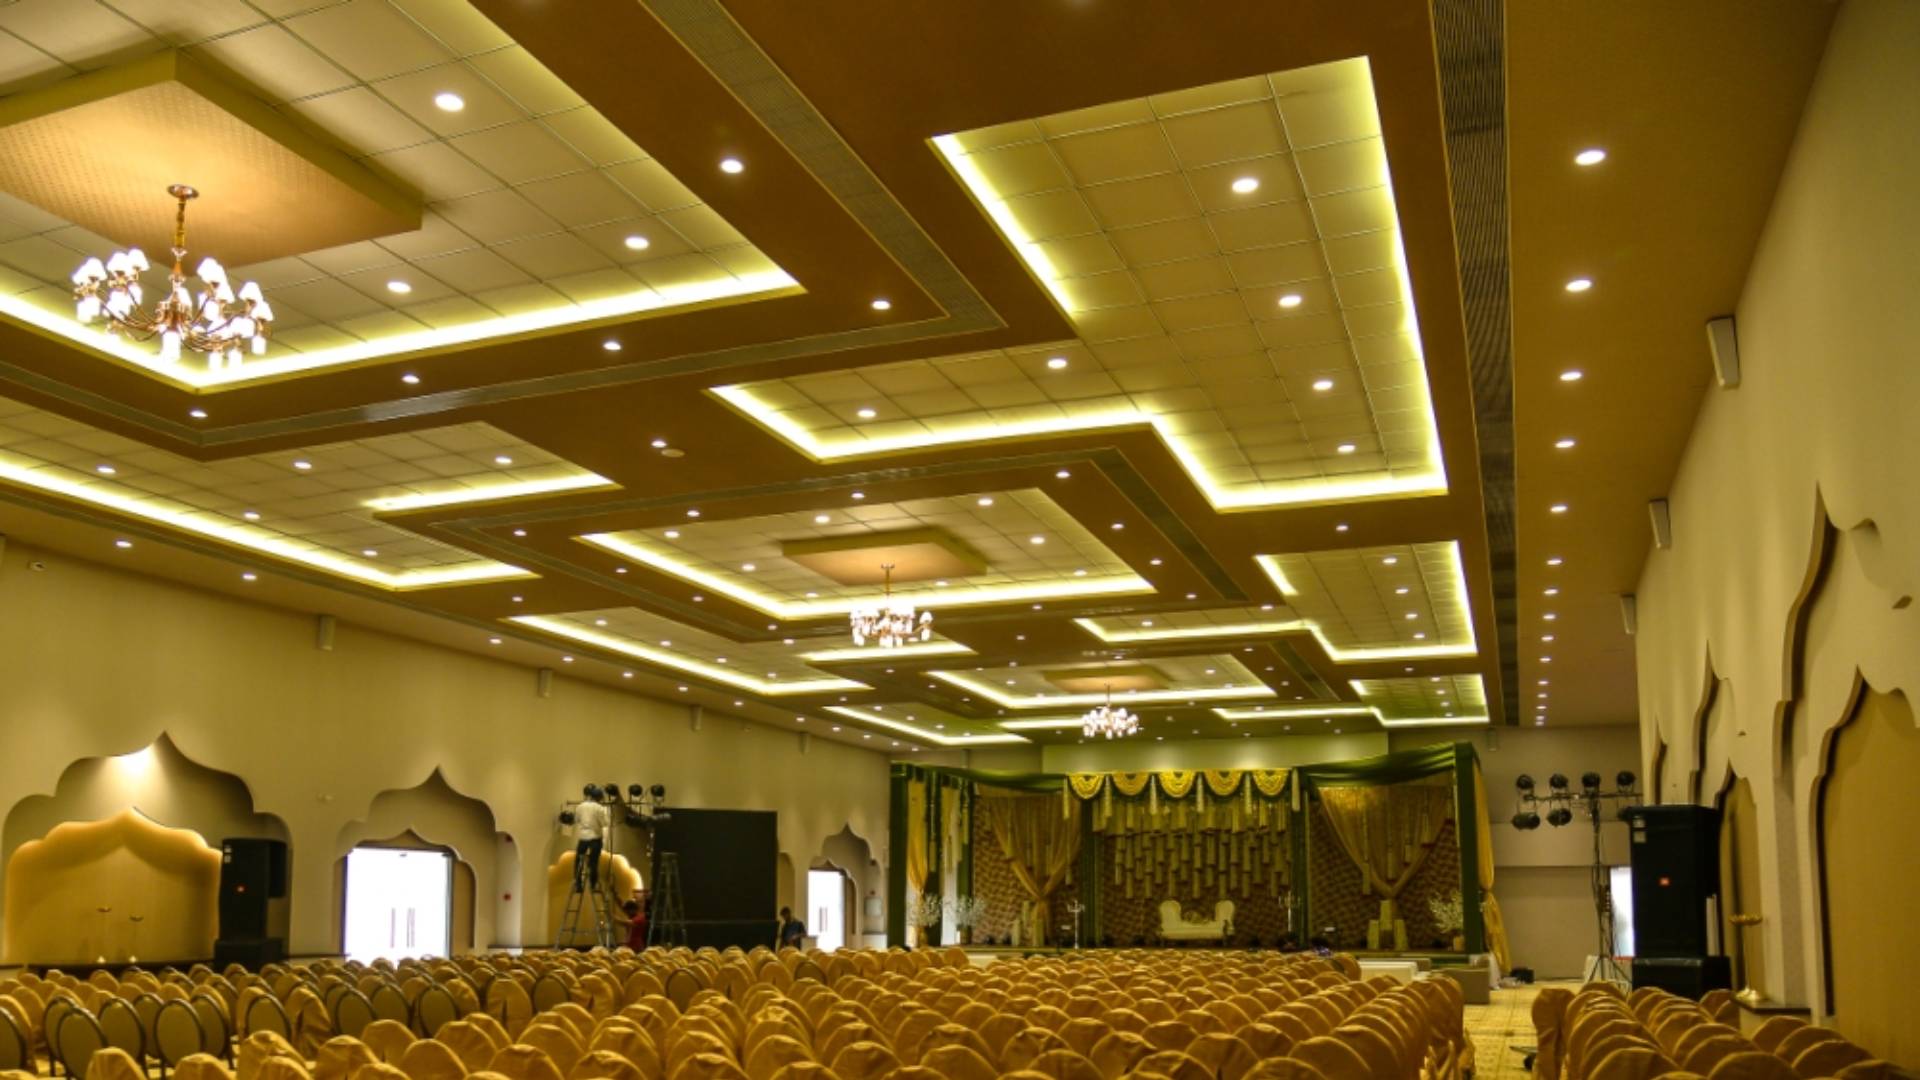 The Kohinoor - Ac Banquet Hall at Sunny's World Pune (7)